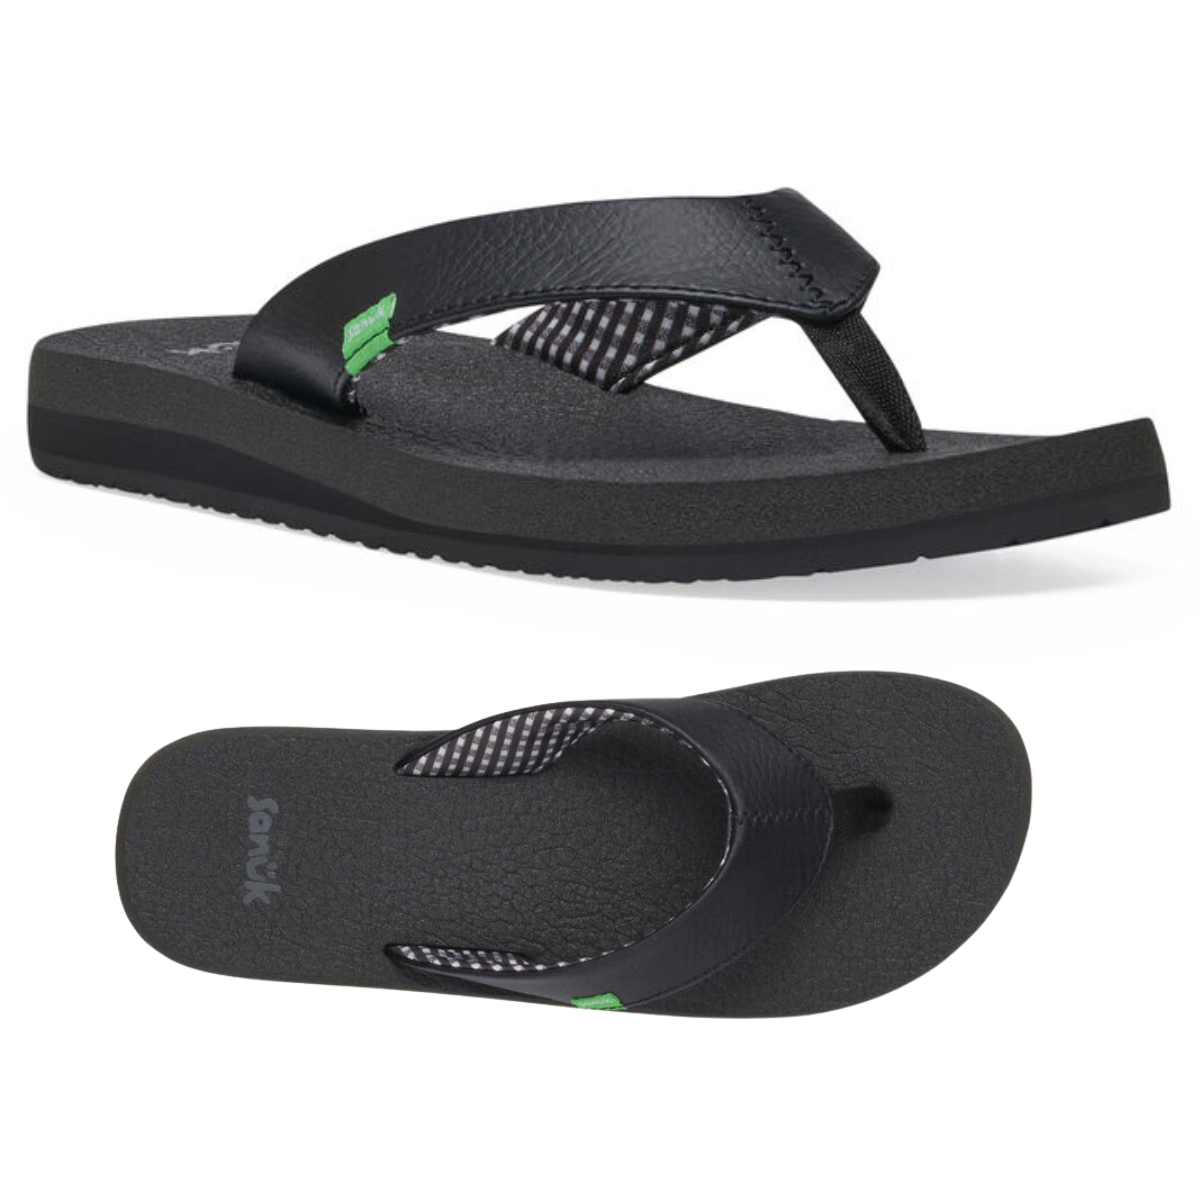 Stylish black and green SANUK YOGA MAT EBONY flip flop sandals crafted with comfortable memory foam insoles.